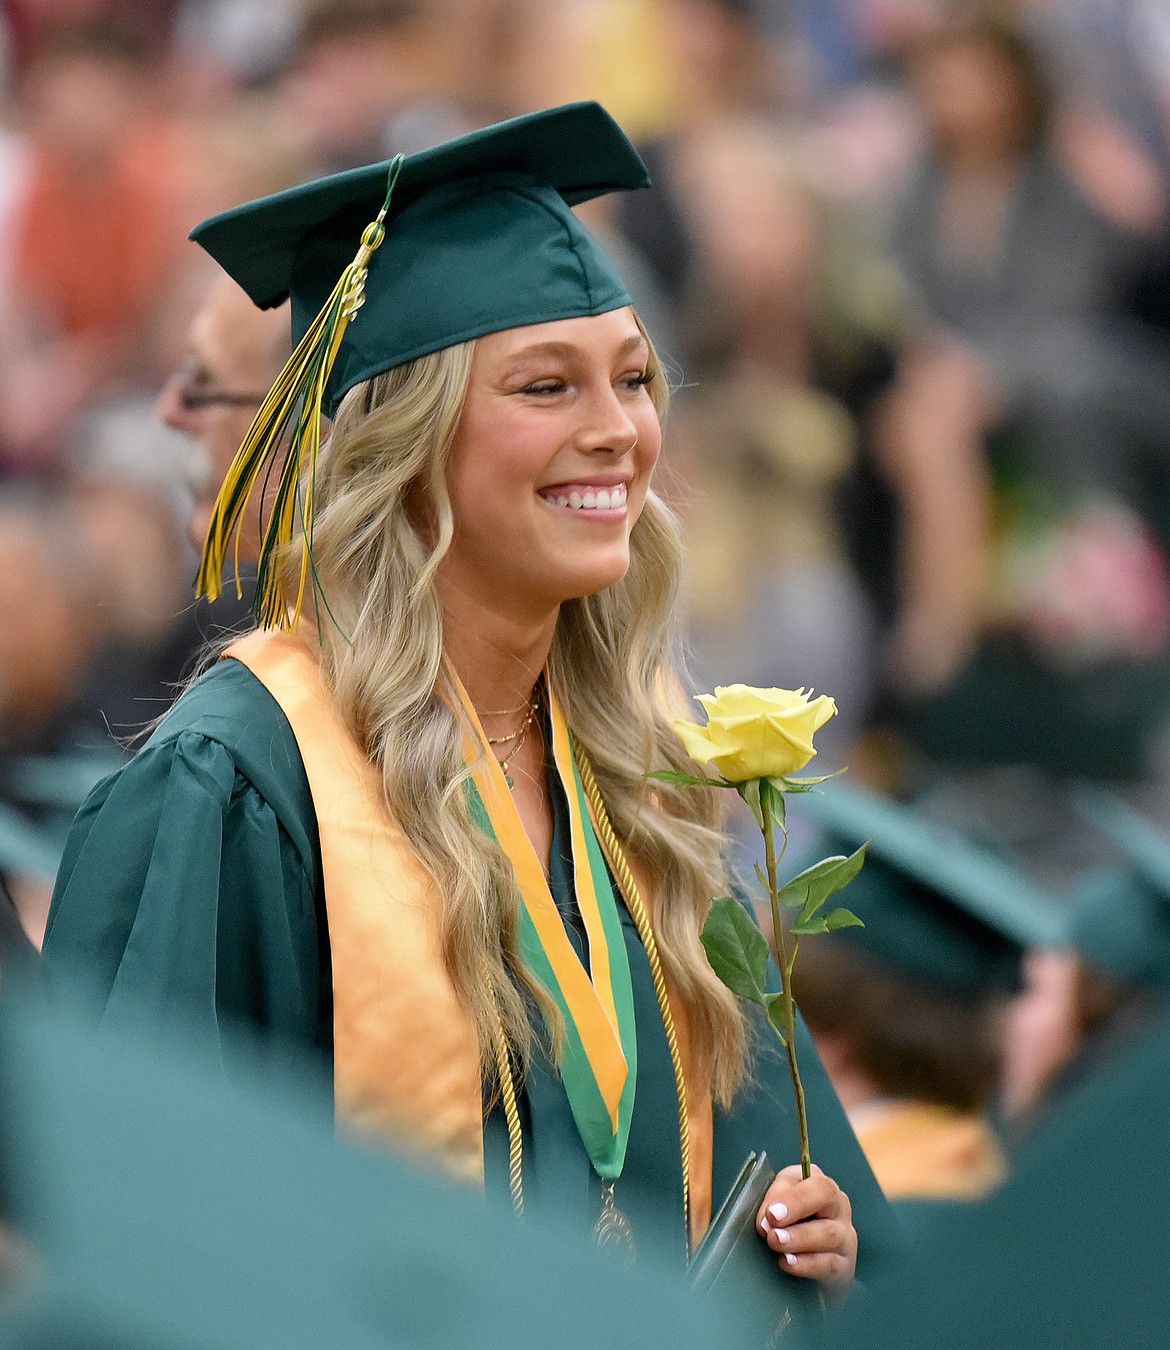 Maile Vine graduates with the Whitefish High School Class of 2022 Saturday during a commencement ceremony at the high school gym. (Whitney England/Whitefish Pilot)